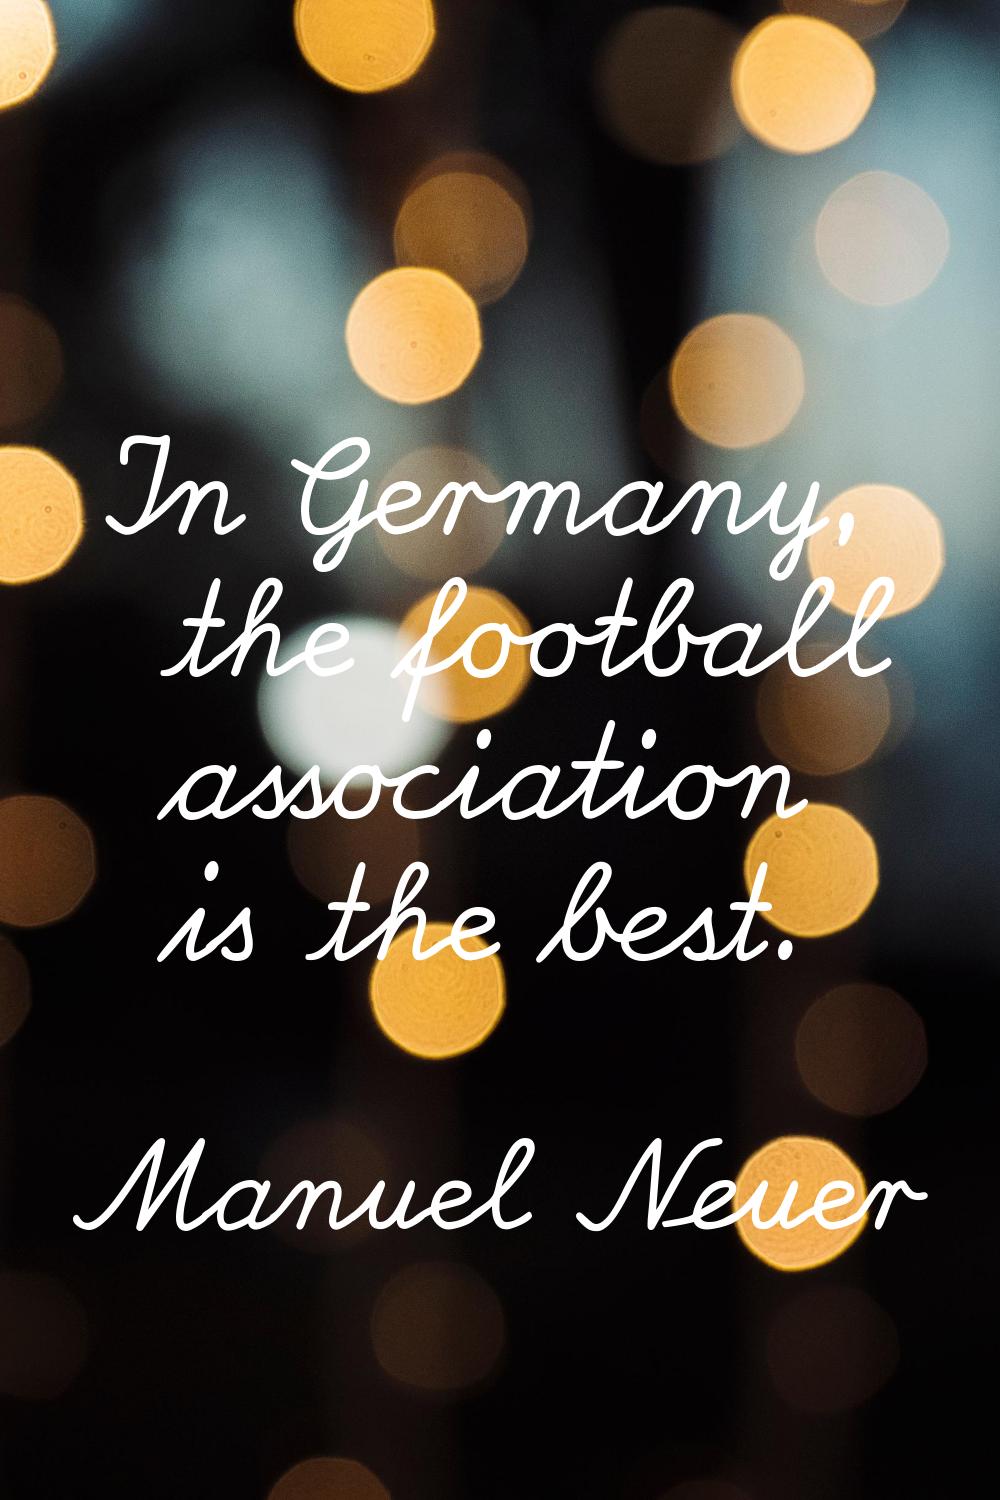 In Germany, the football association is the best.